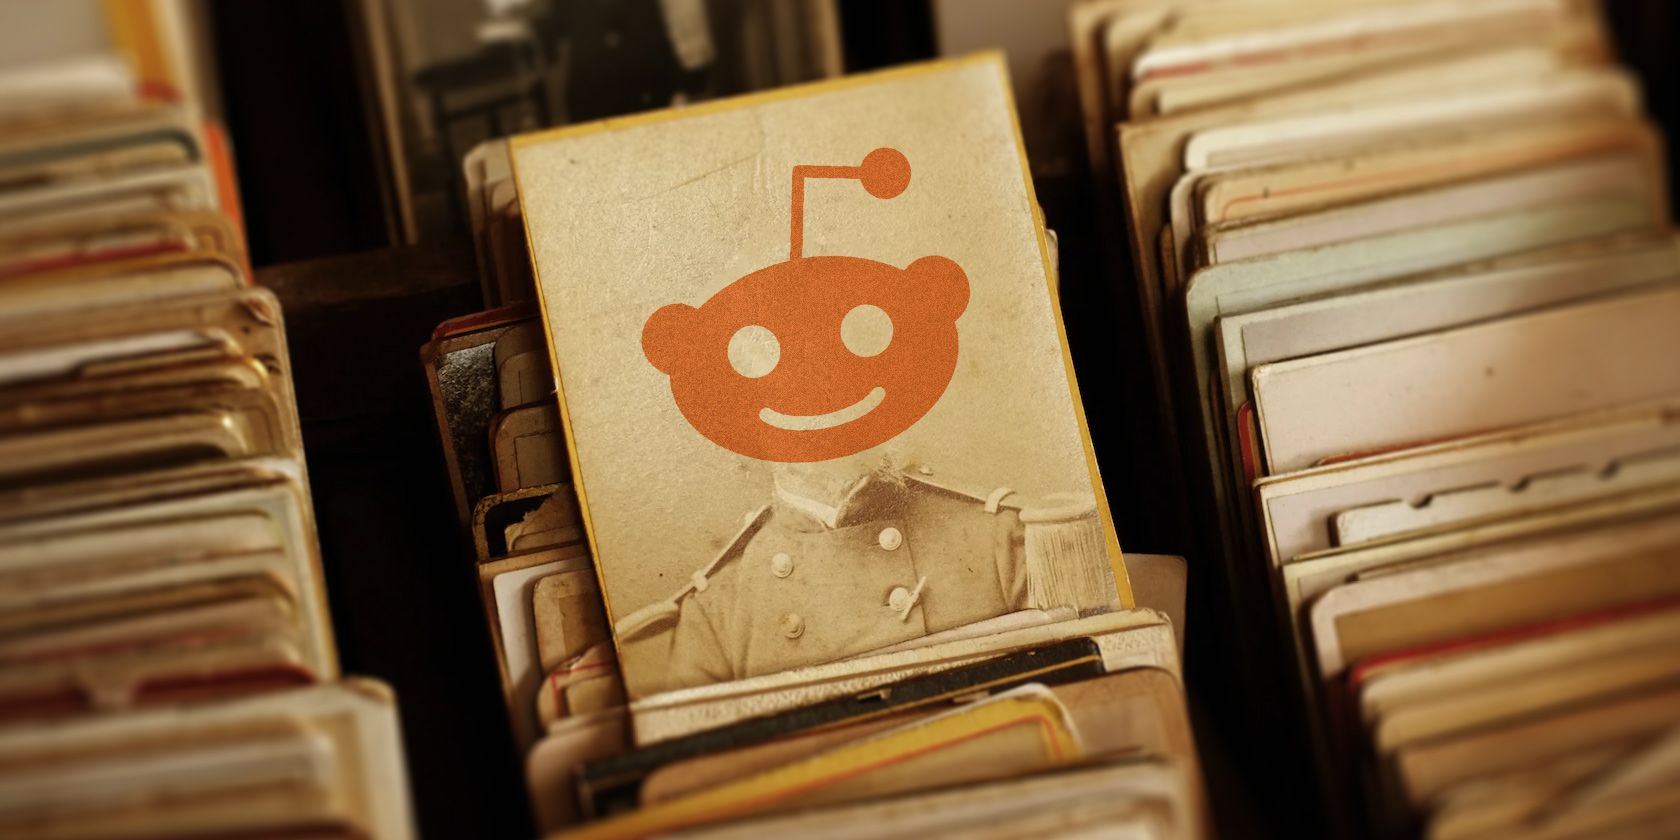 Who Owns Reddit? And Who Were the Founders?